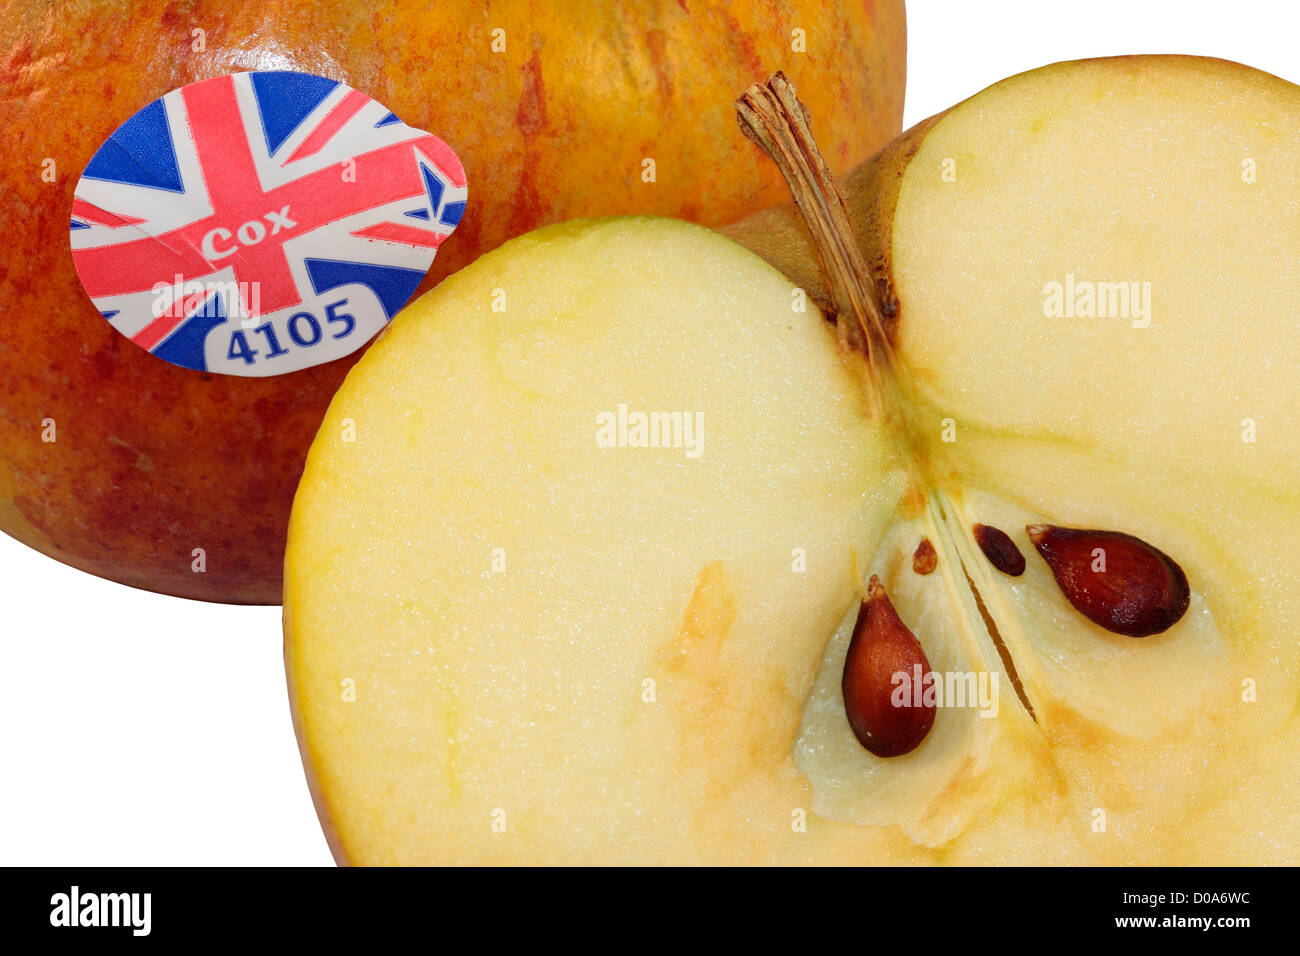 One and a Half Cox's Apples One Apple cut i half to show seeds isolated on white background. Stock Photo